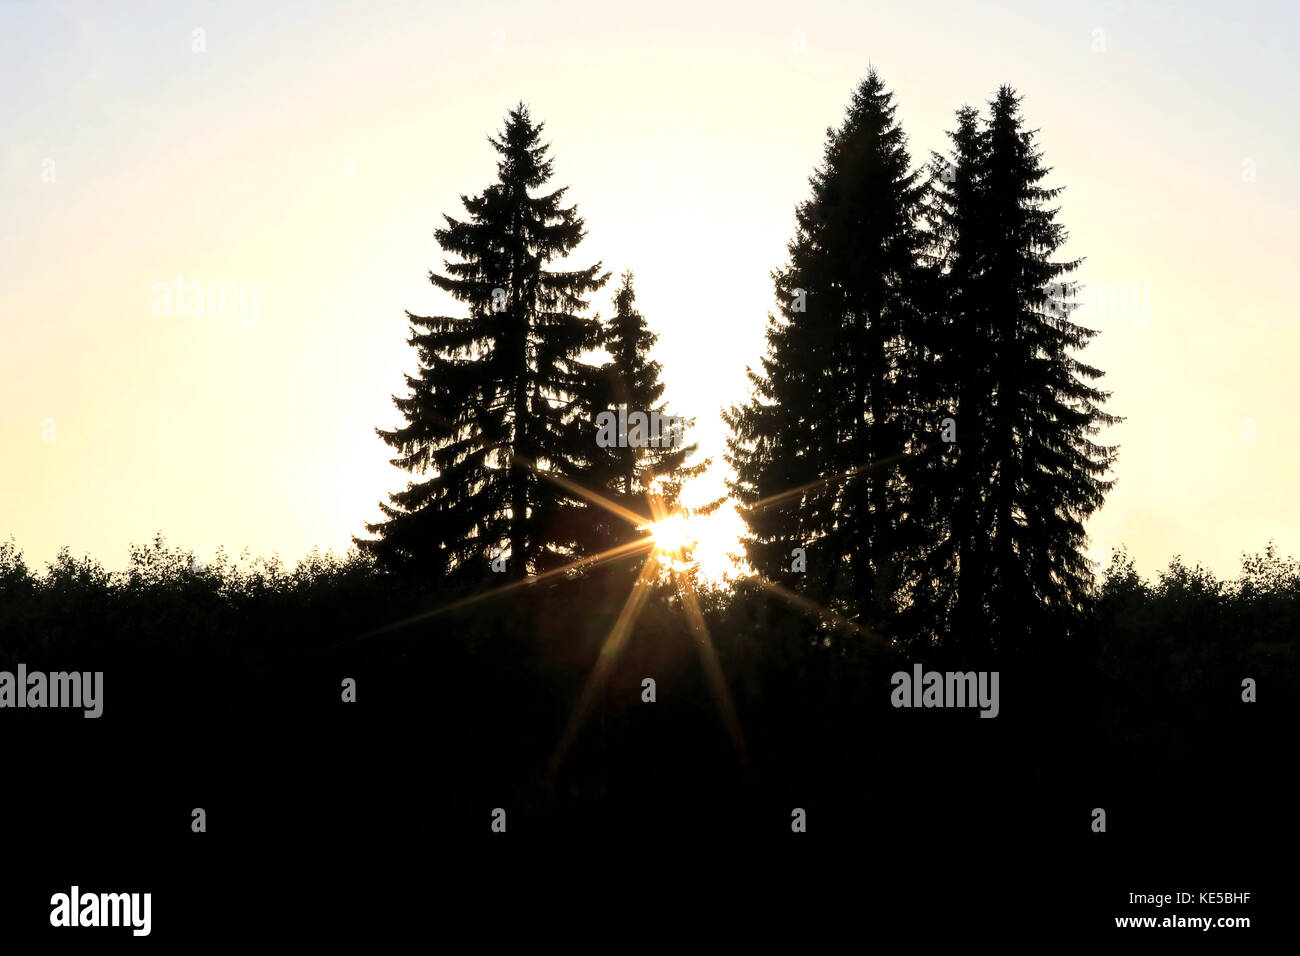 The Sun takes the shape of a star when it sets behind large spruce trees in Autumn. Copy space. Stock Photo